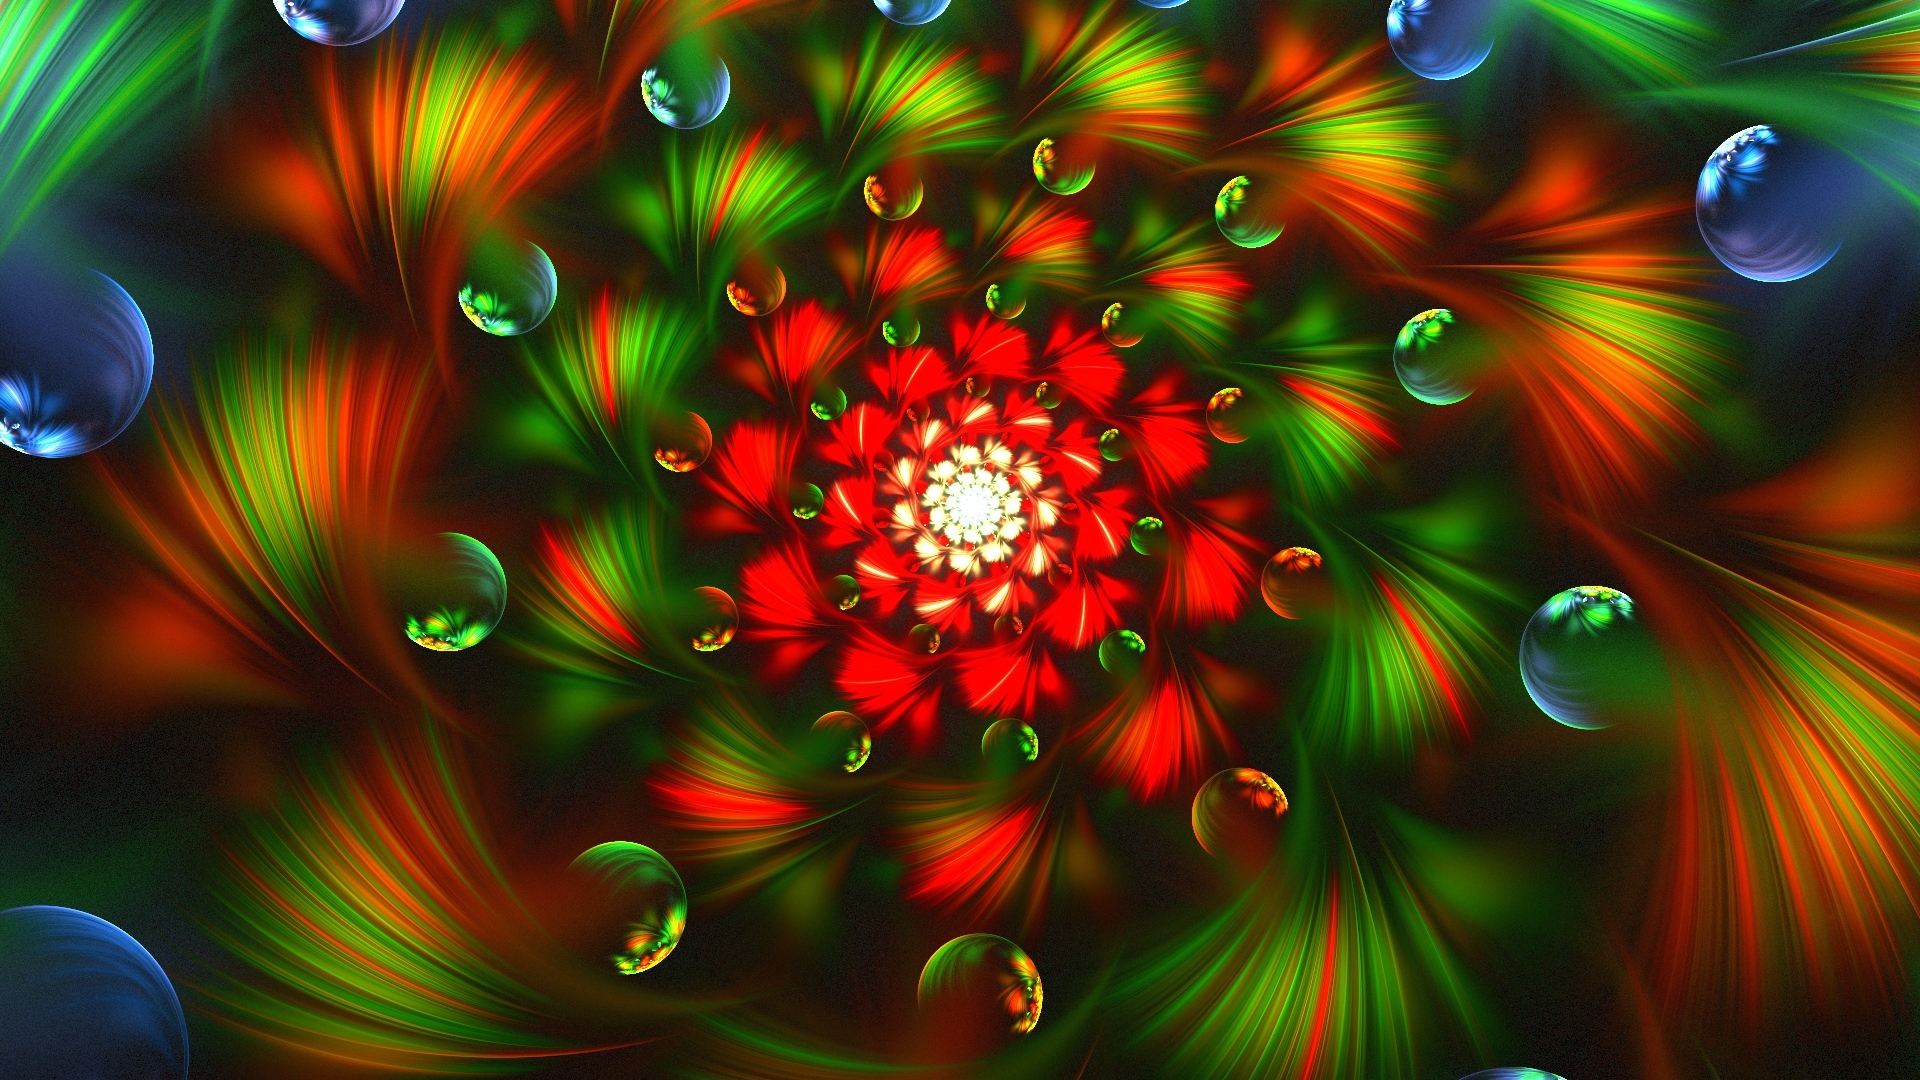 Wallpaper 3d Abstract Fractal Colorful Bright Full HD